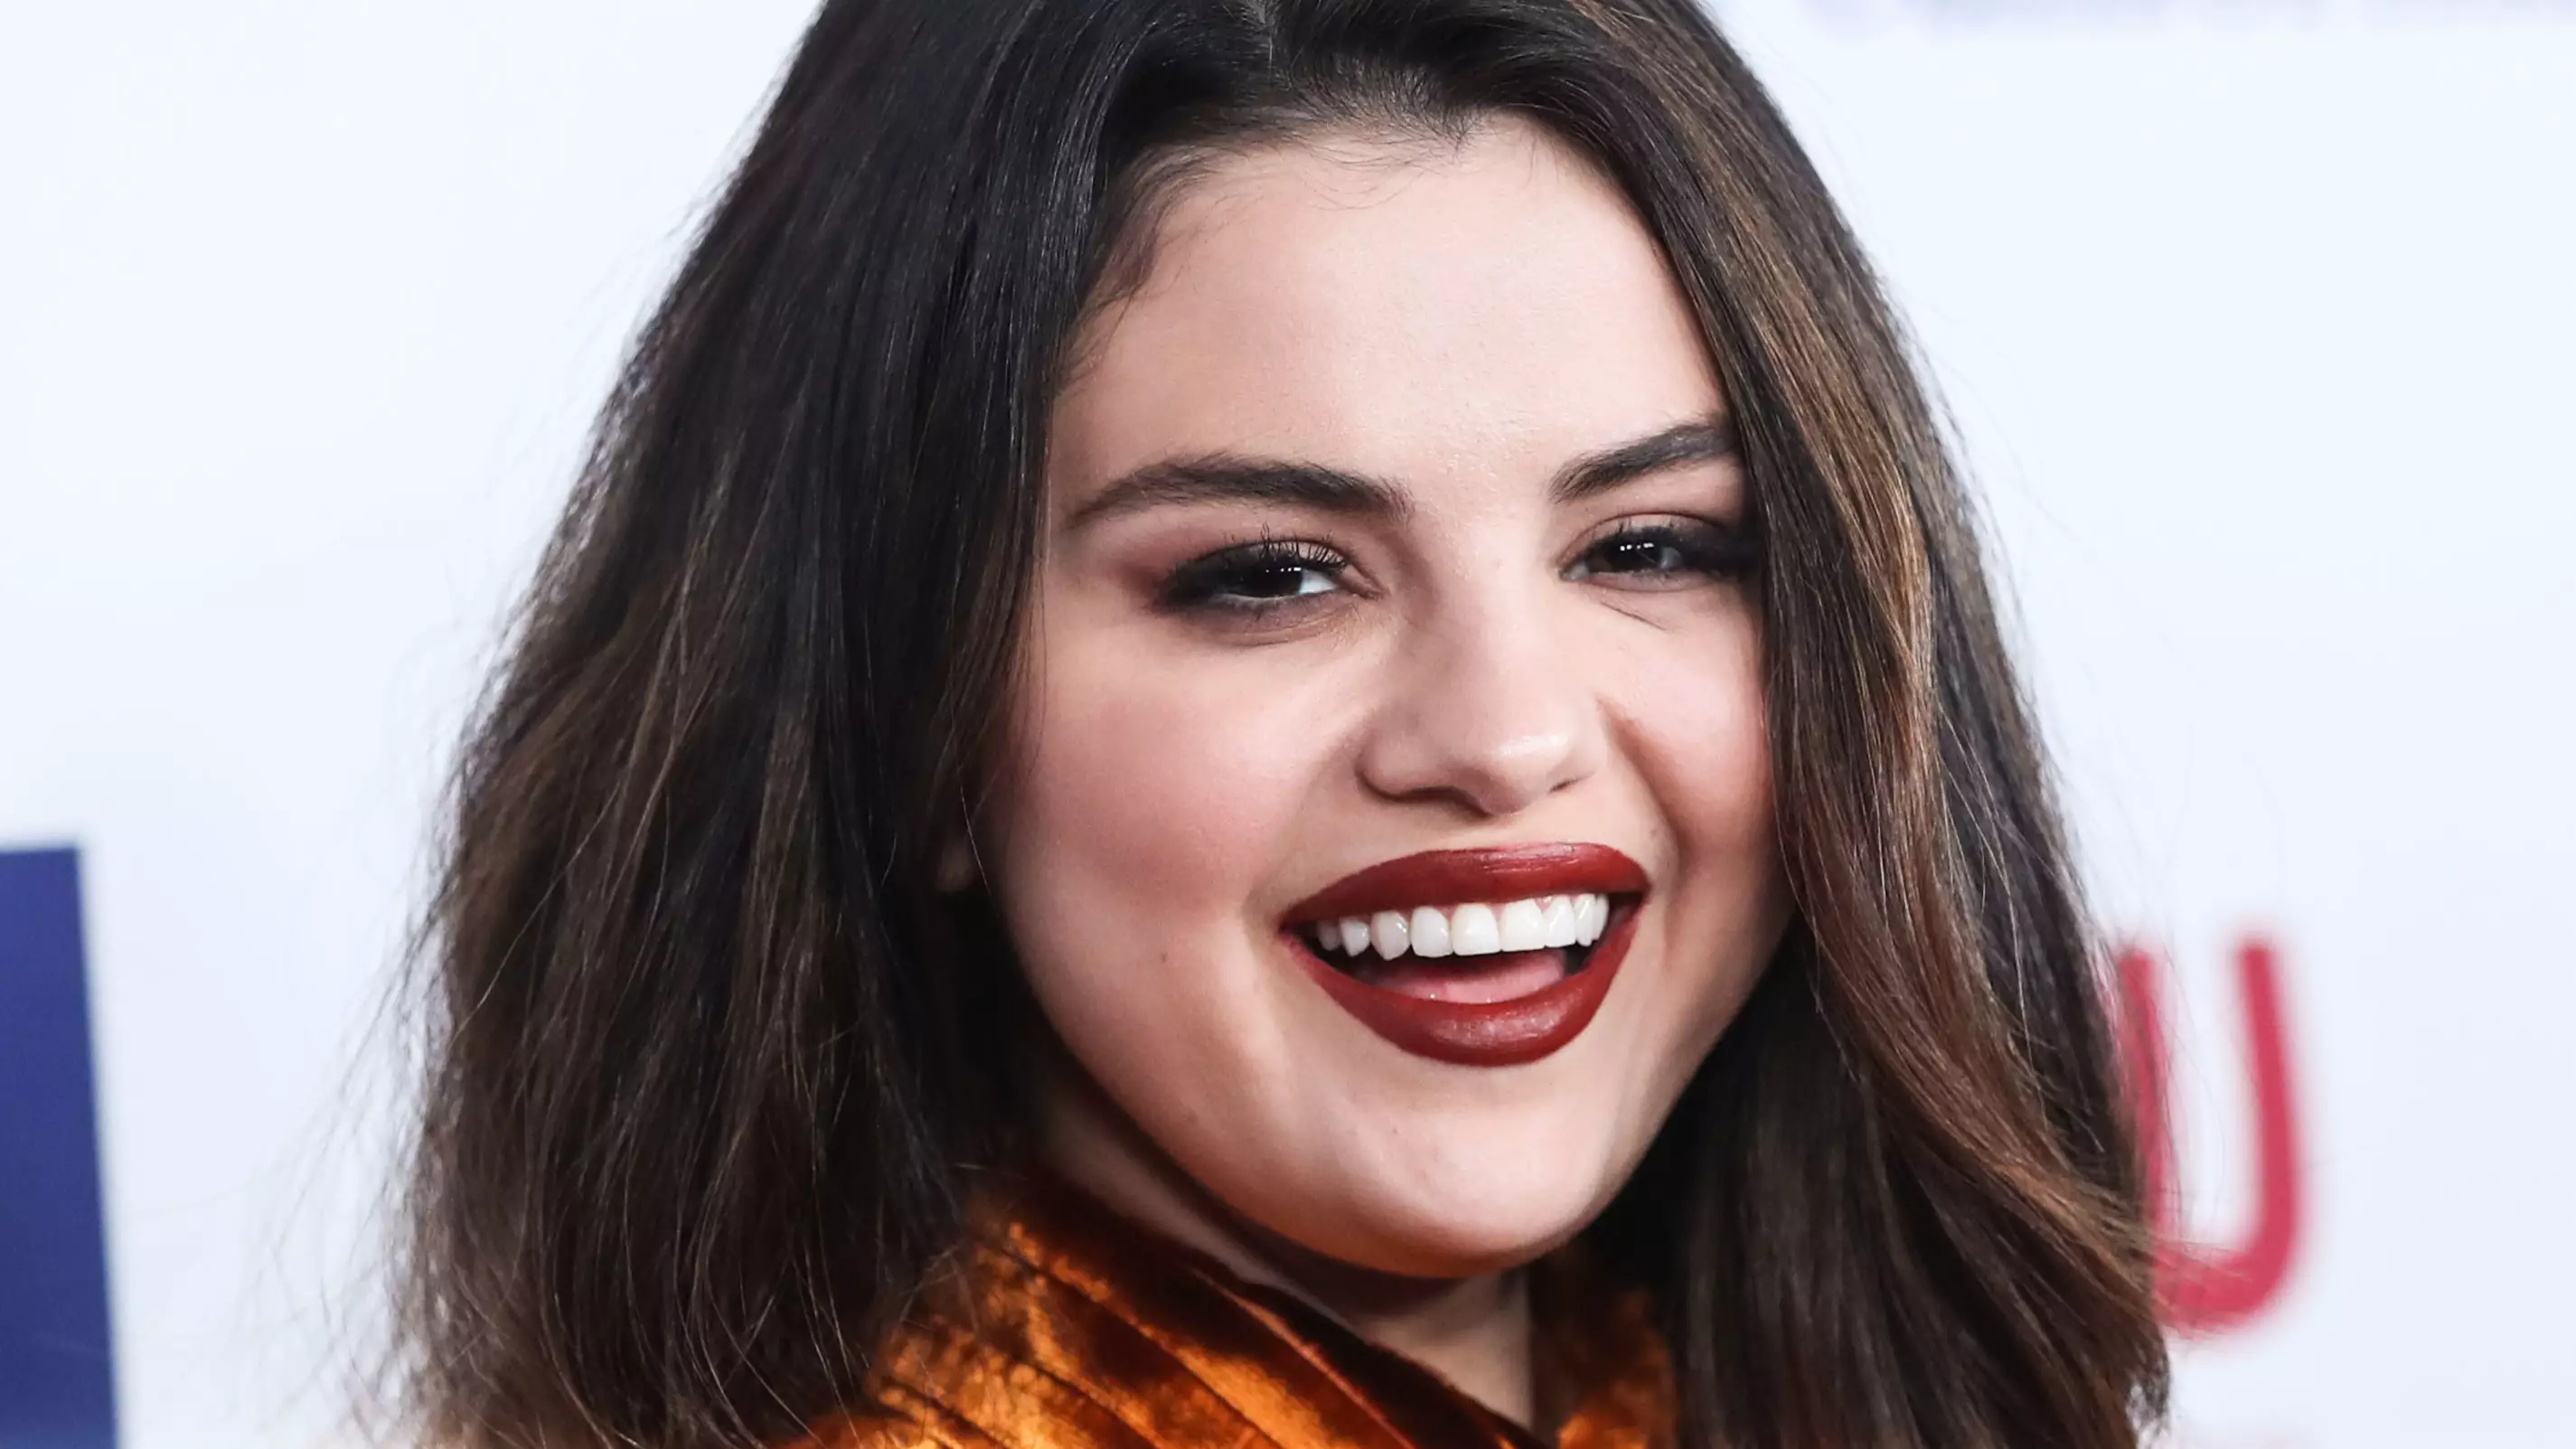 Saved By The Bell Creators Apologise For Joking About Selena Gomez's Kidney Transplant